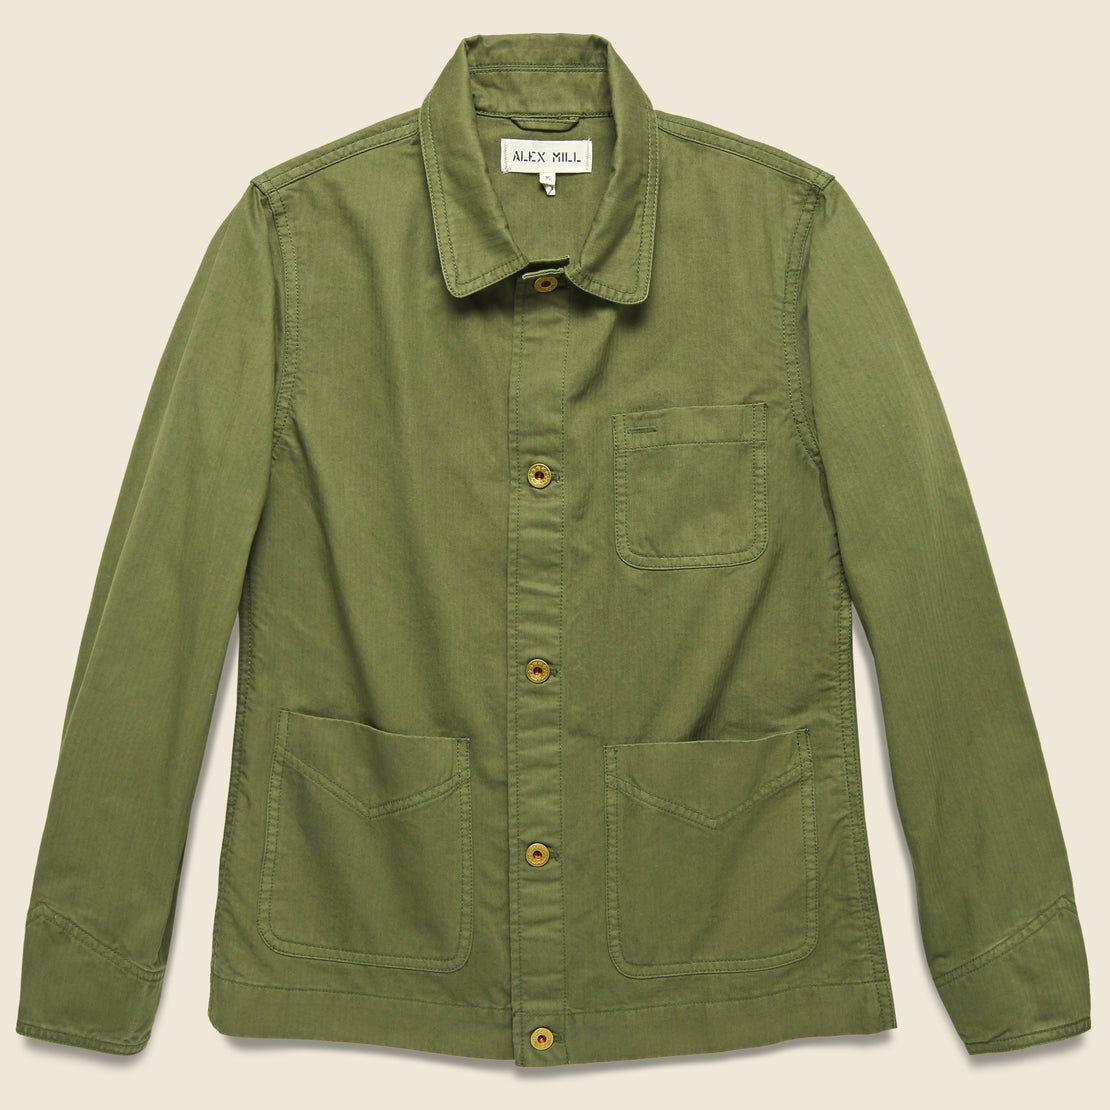 Alex Mill Garment Dyed Workers Jacket - Army Olive